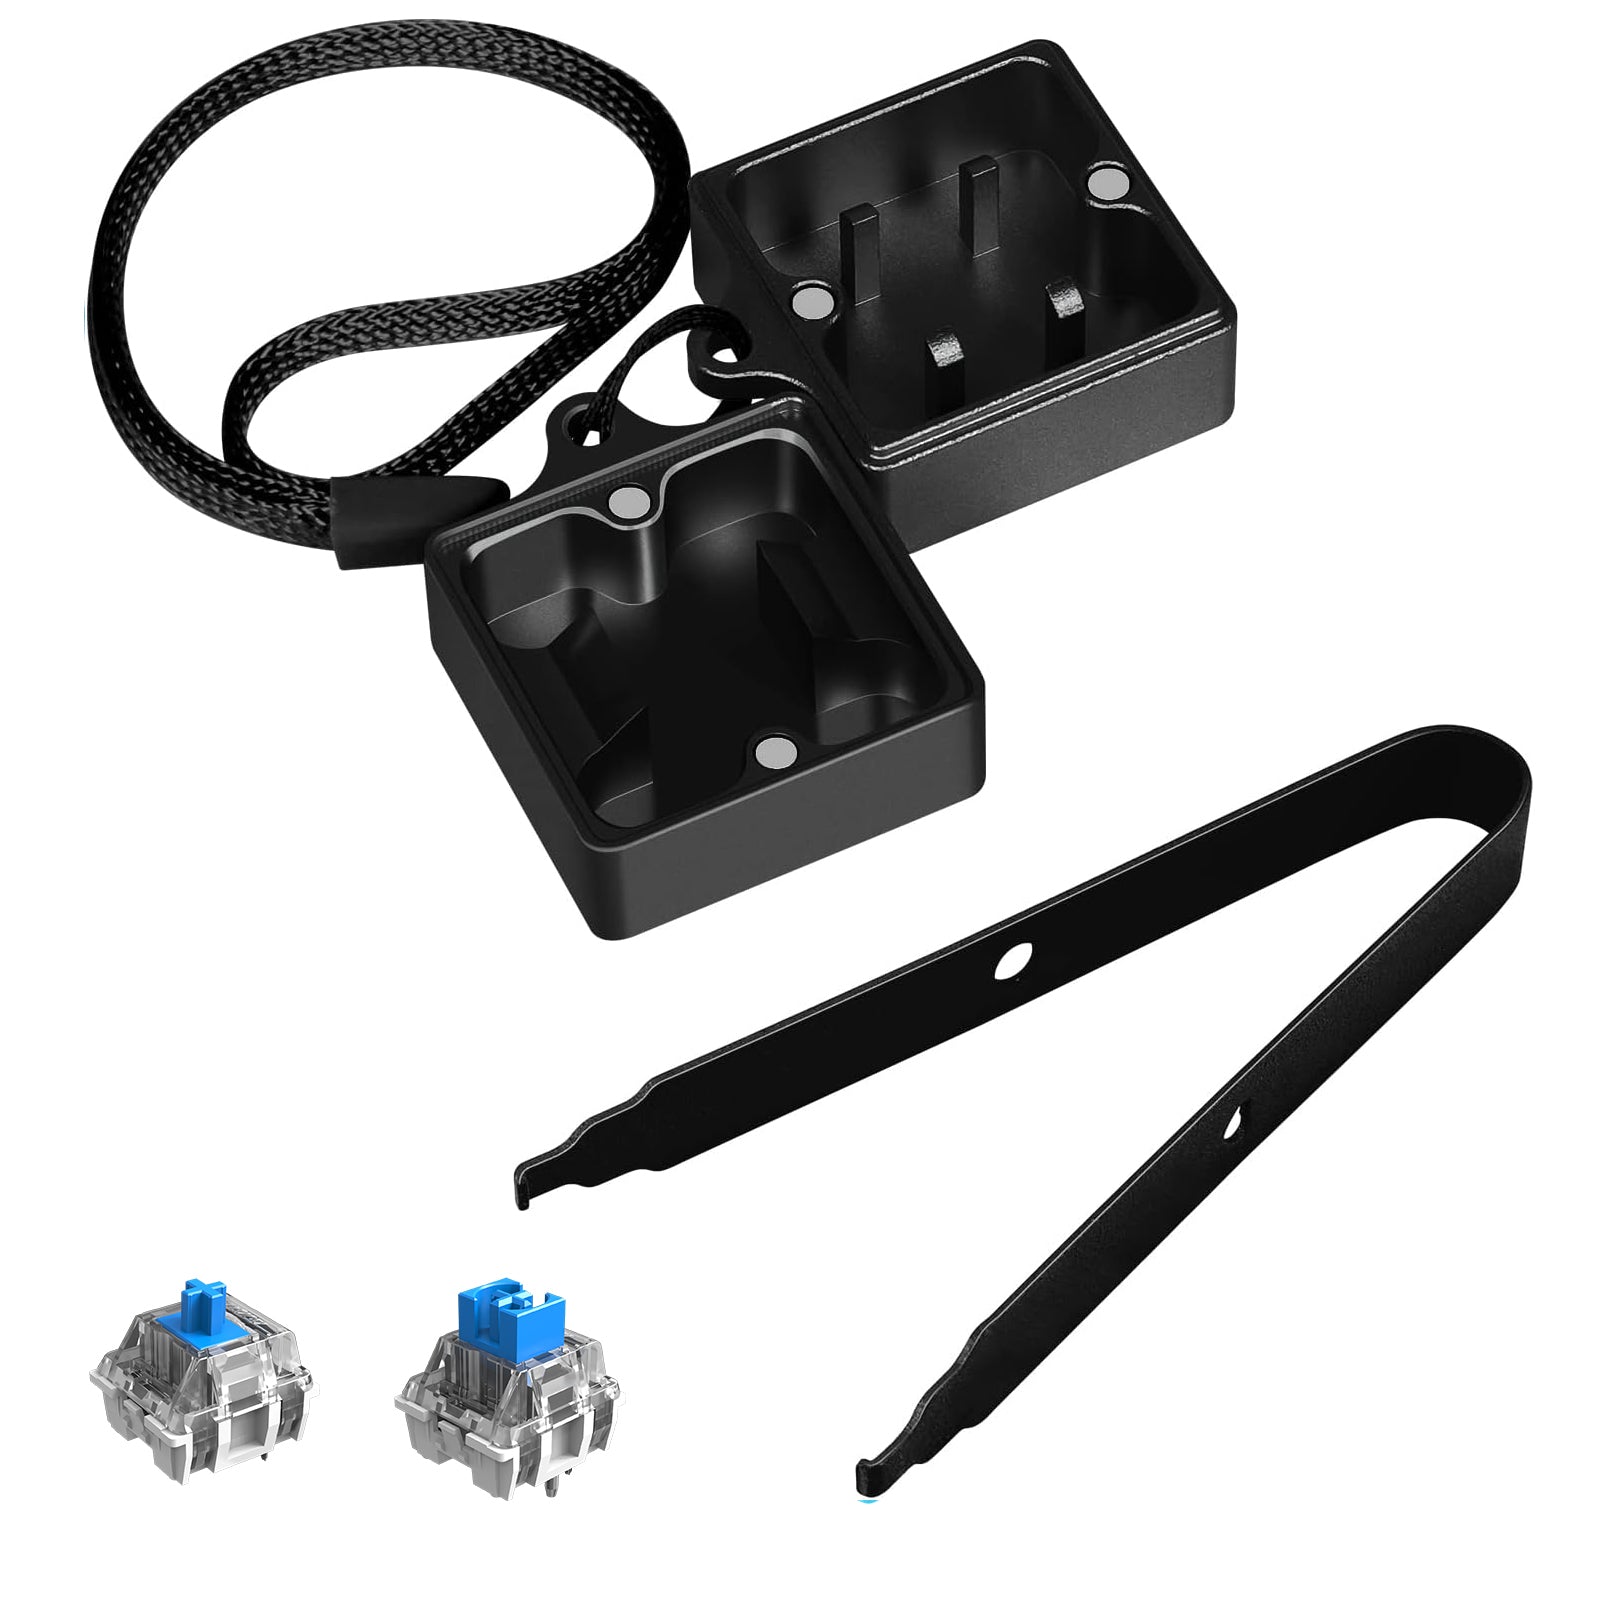 Switch Opener Kit with Switch Puller, Aluminum Mechanical Keyboard Swi